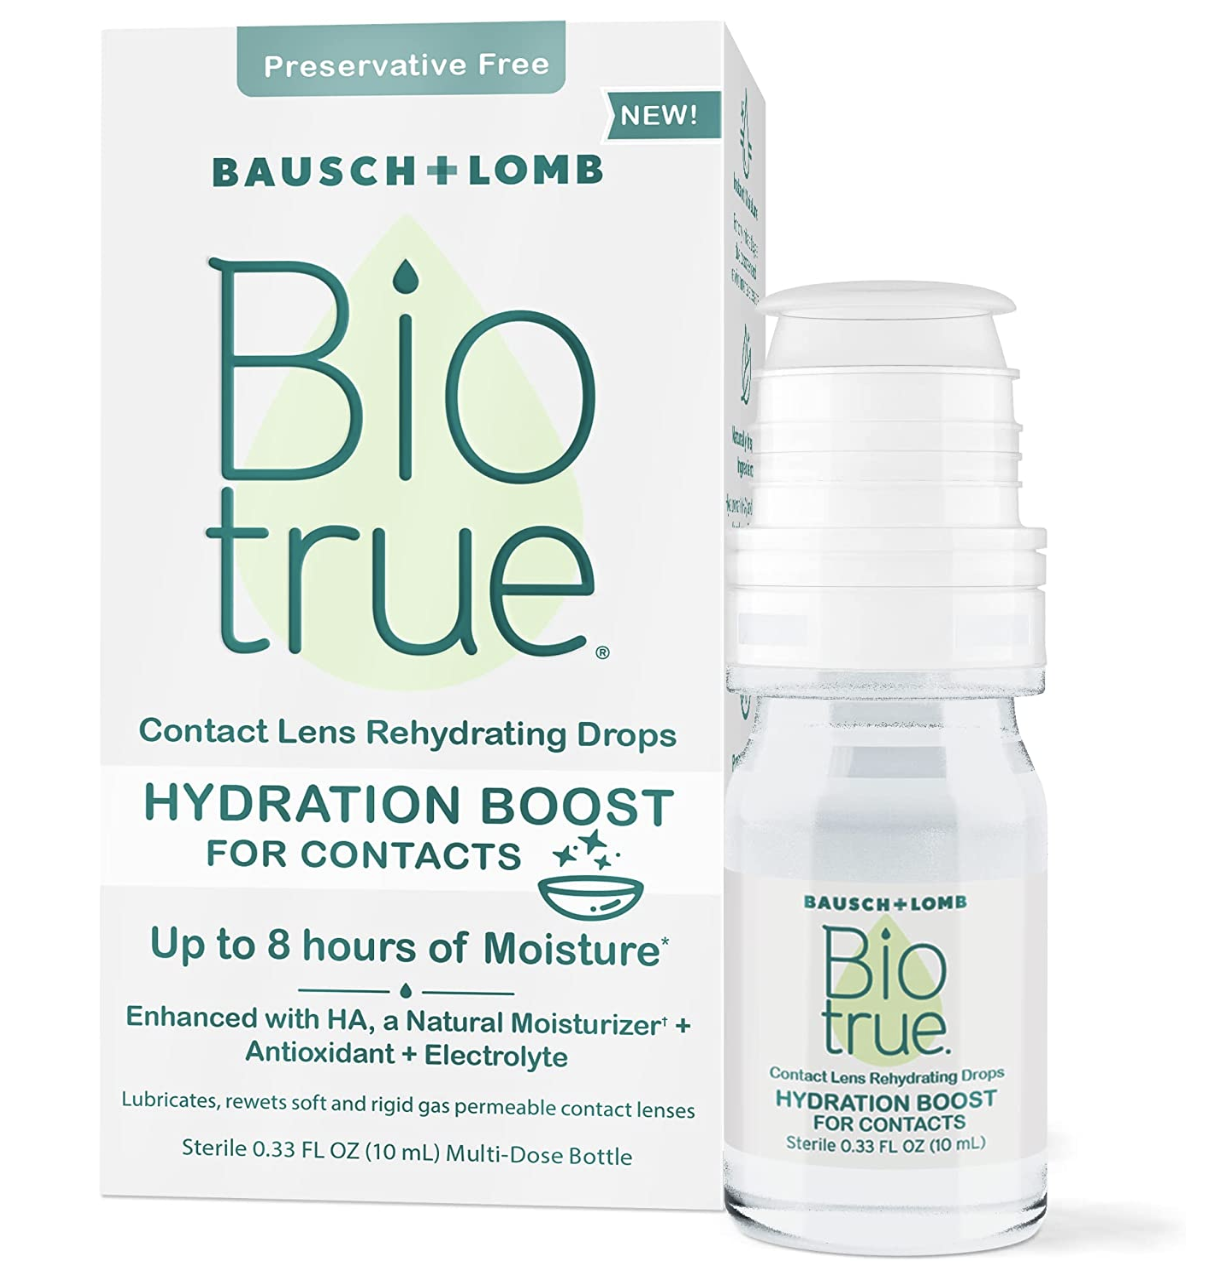 Biotrue Hydration Boost Contact Lens Rehydrating Drops are now available in the US.